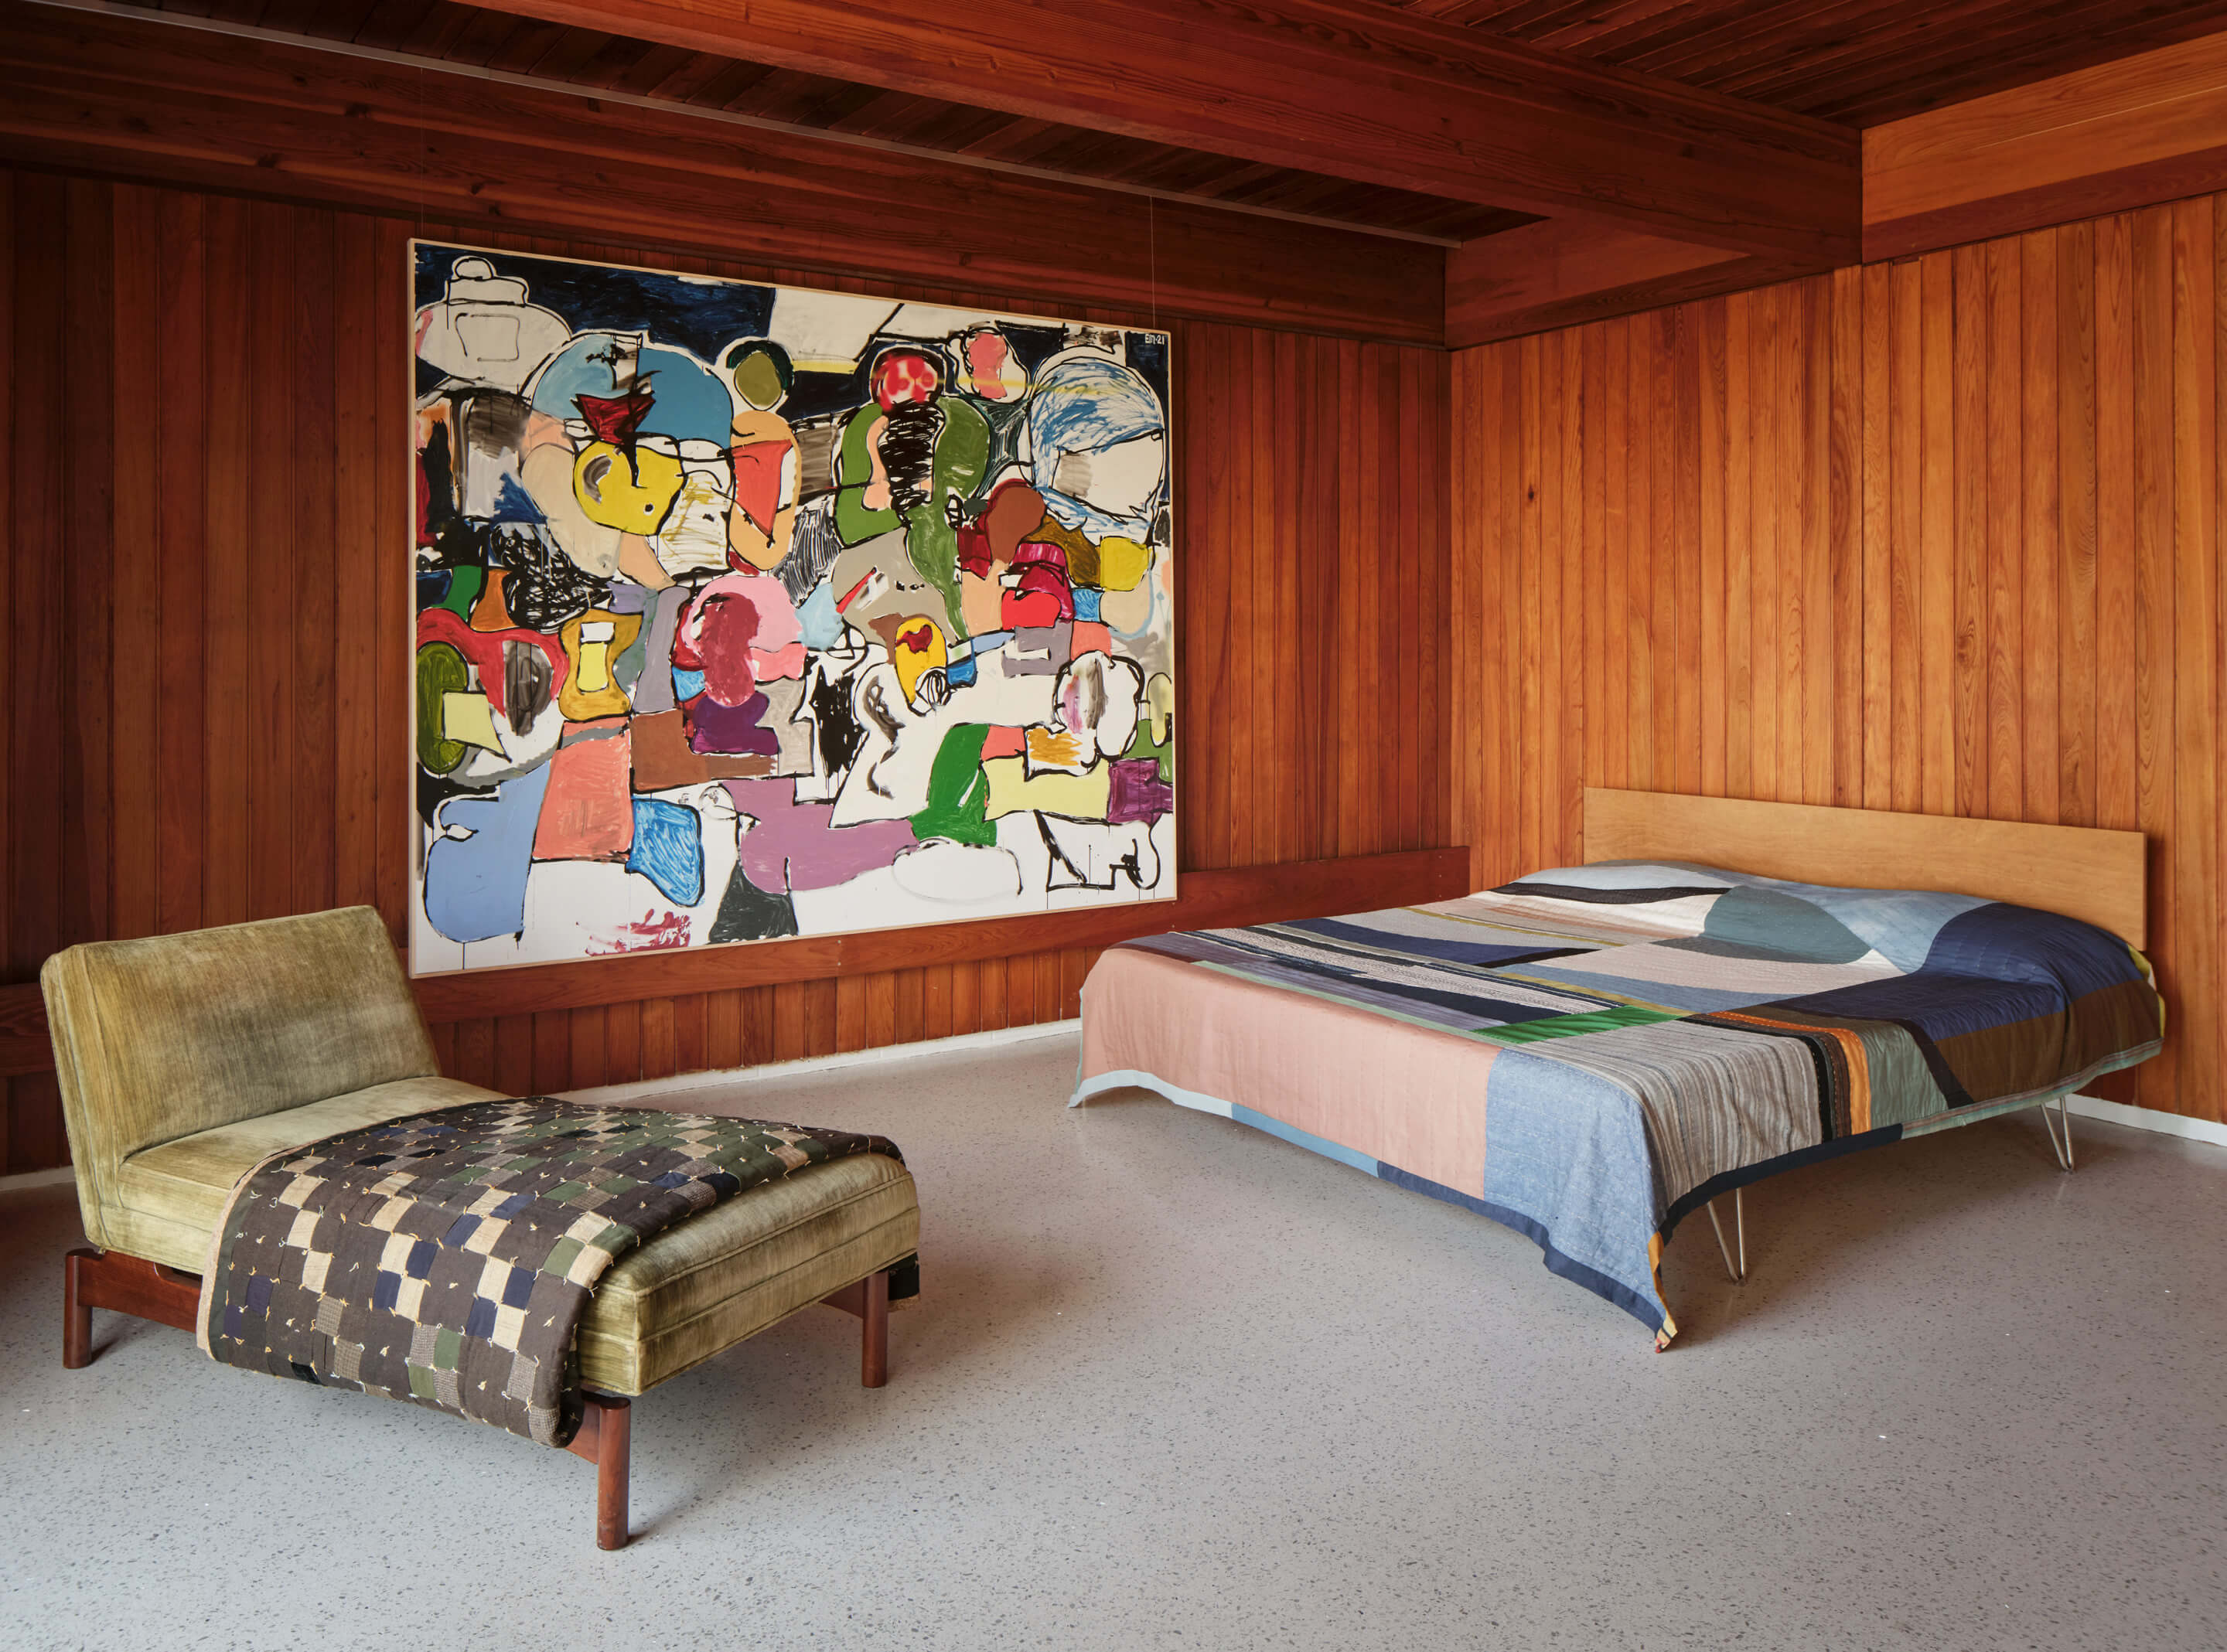 Inside the wood paneled Luss House, with two day beds